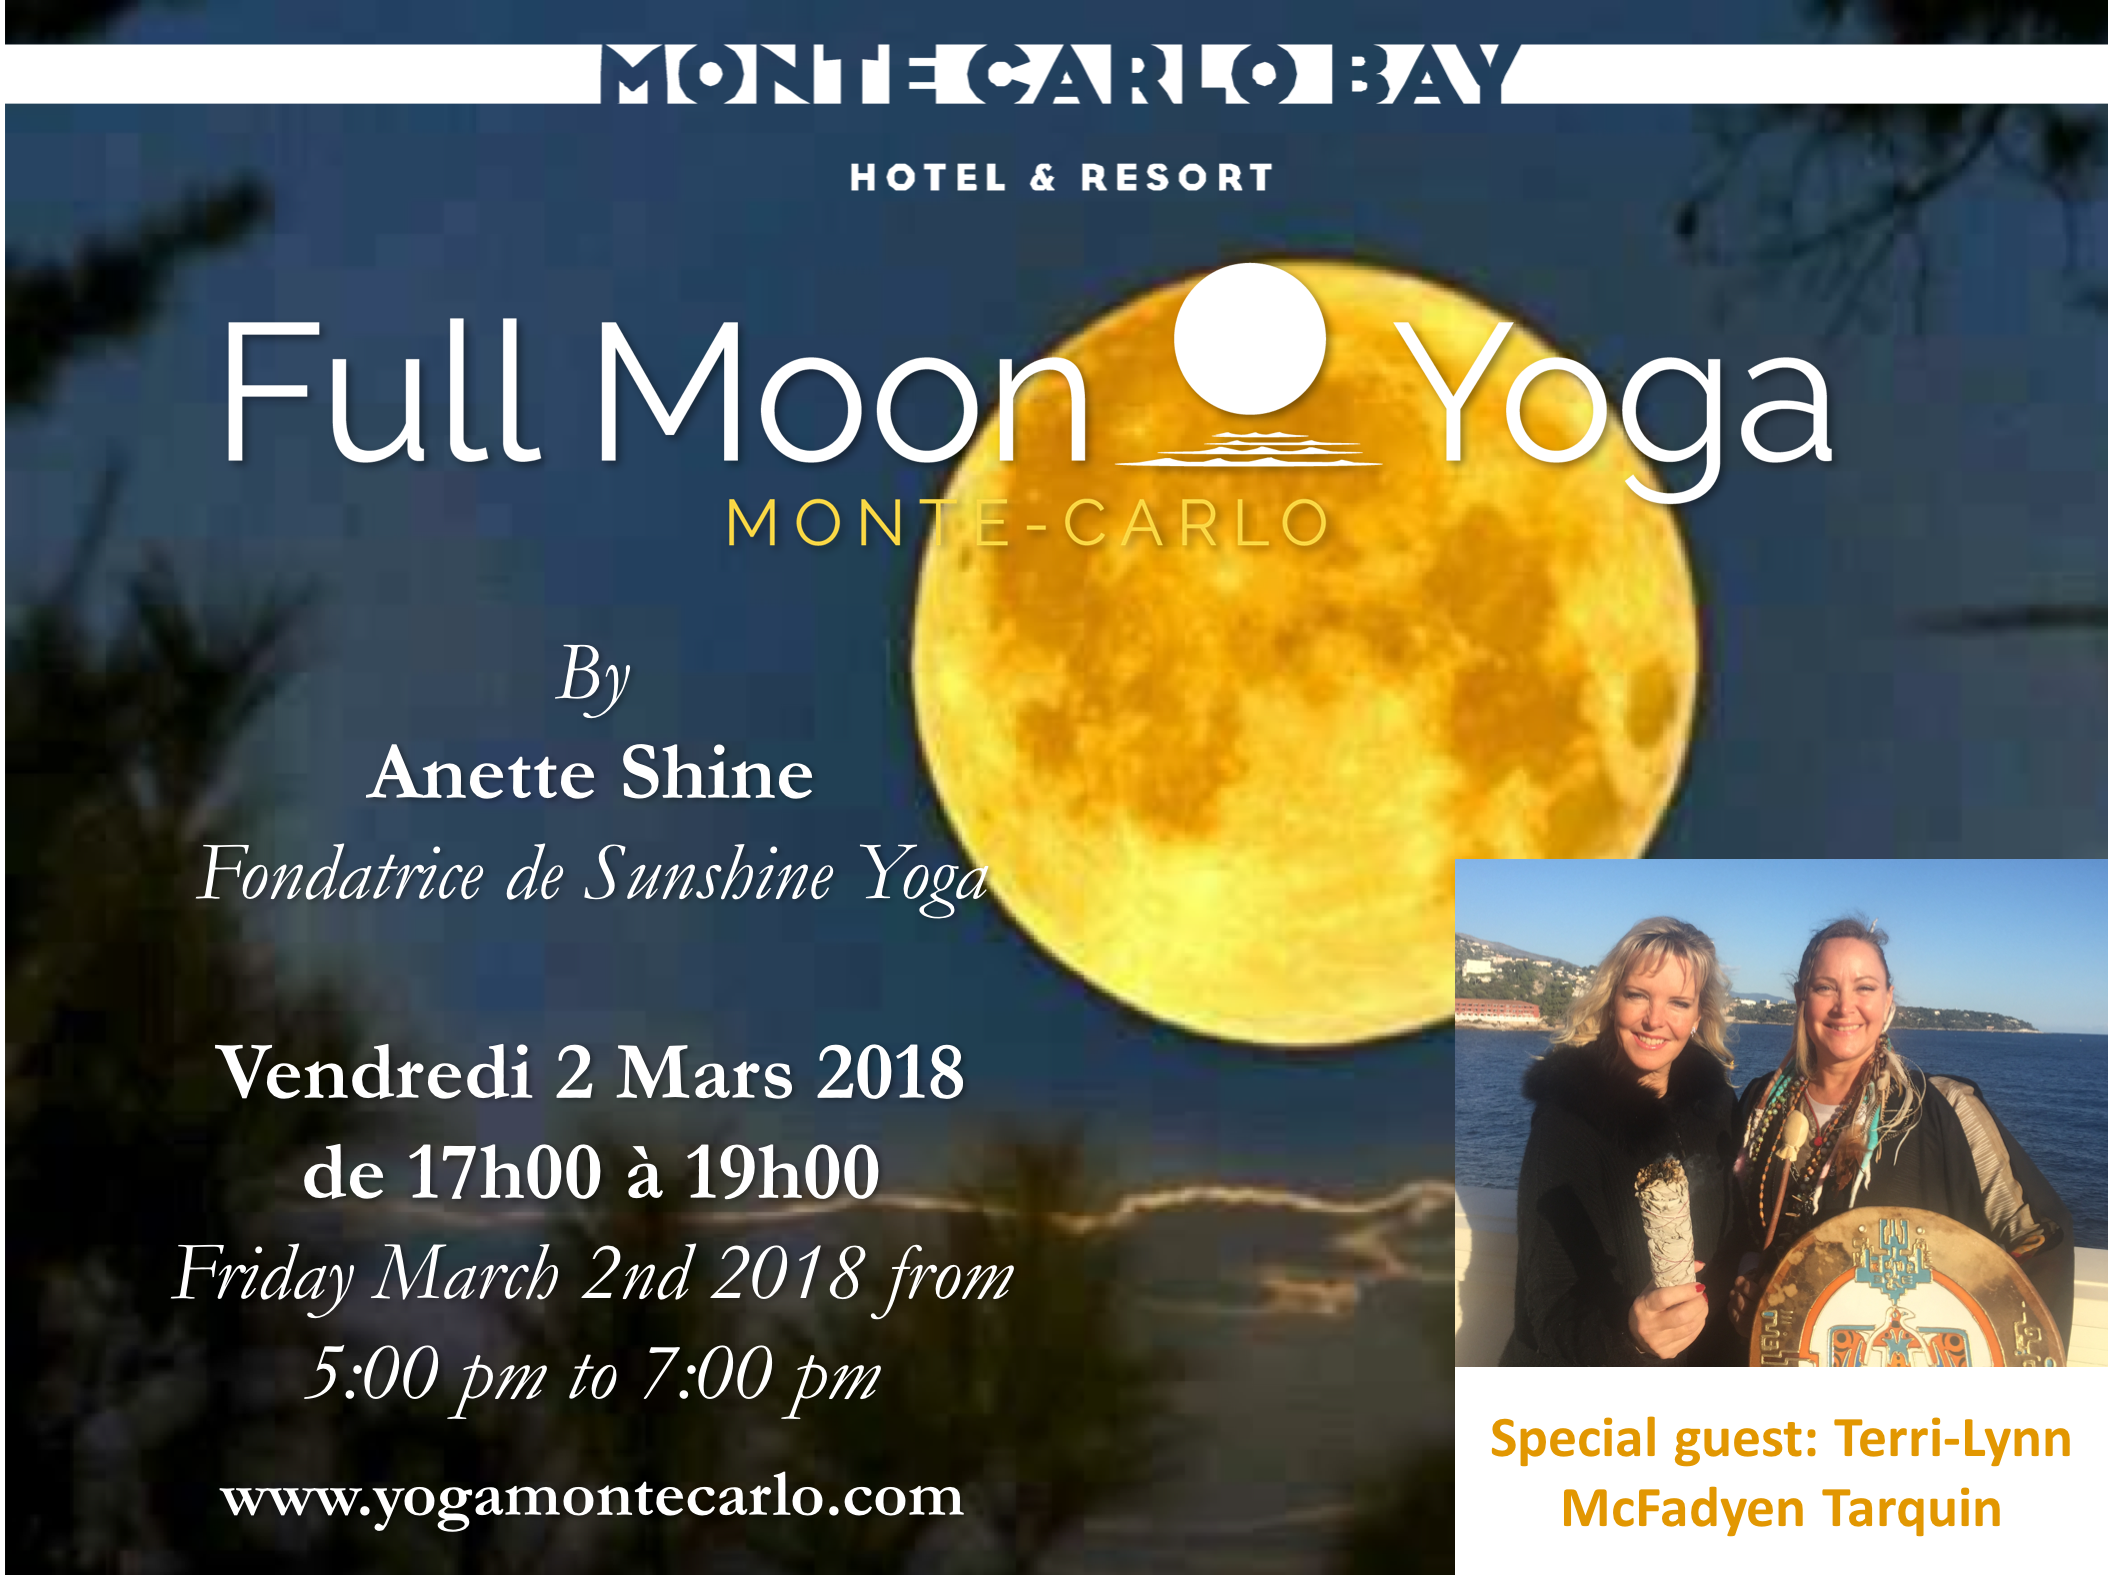 You are currently viewing Full Moon Yoga Monte-Carlo on March 2nd 2018, OUTSIDE at 5:00 pm